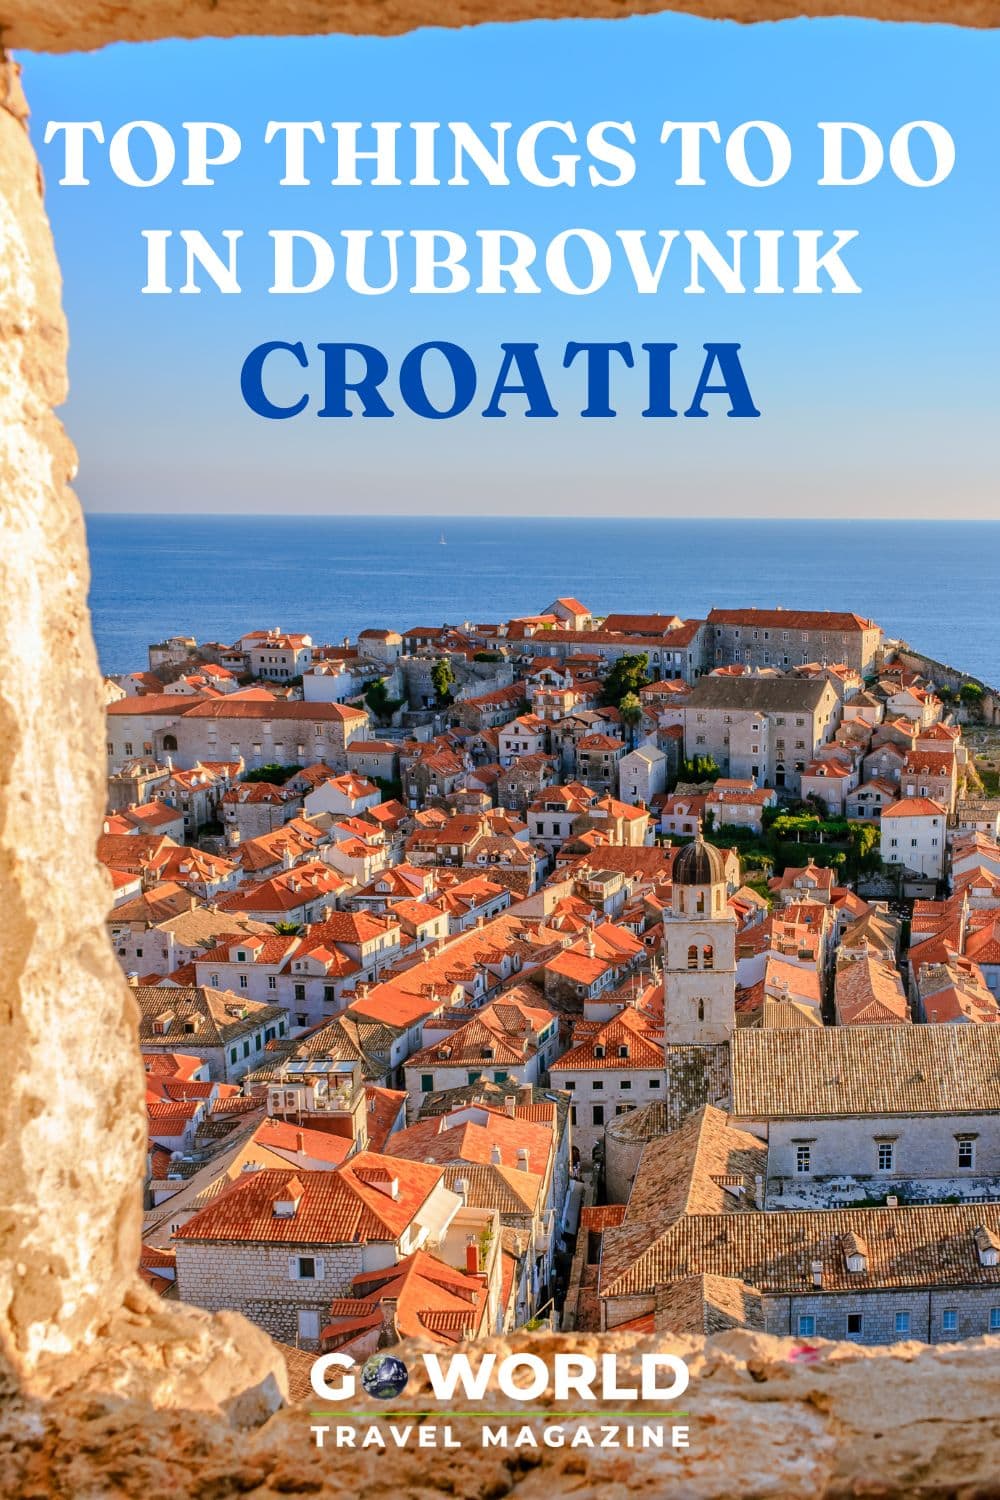 Discover the top things to do in Dubrovnik, Croatia from walking the Old City walls to visiting Fort Lovrijenac or just relaxing on the beach. #Croatia #Dubrovnikcroatia